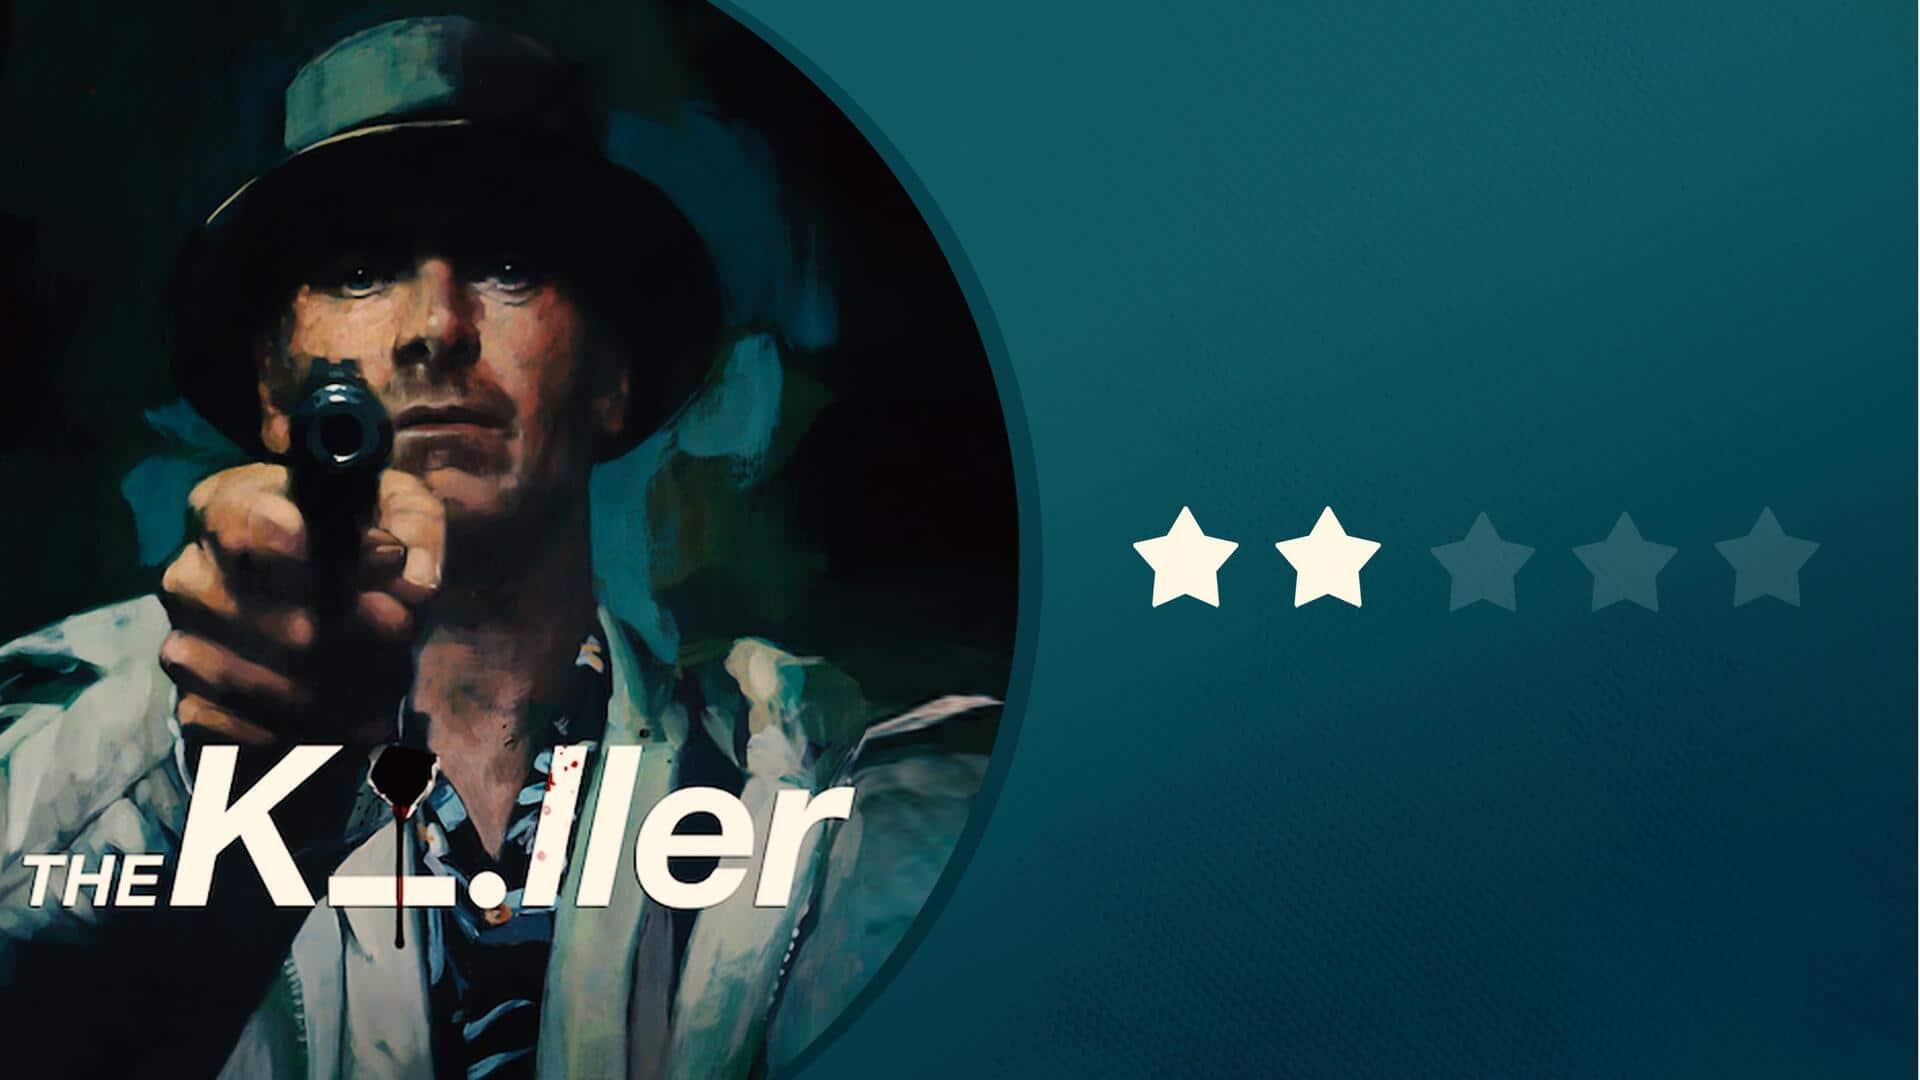 'The Killer' review: David Fincher's thriller feels distant, unstimulating